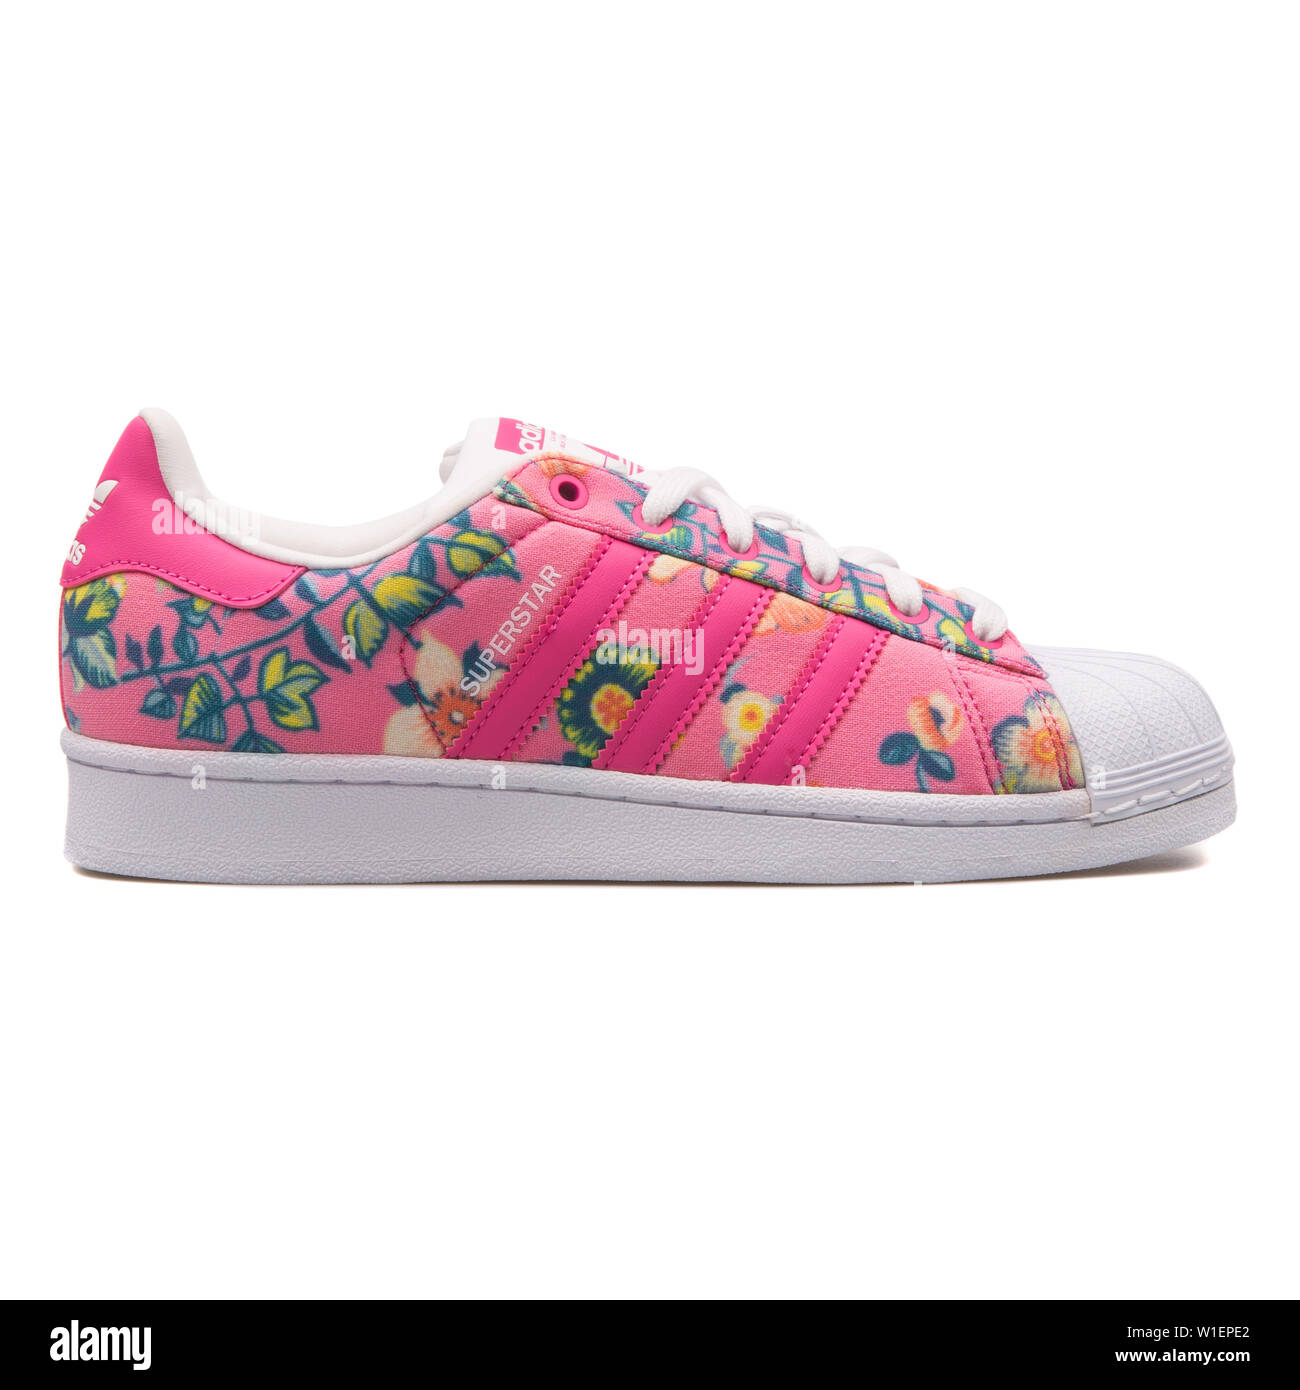 AUSTRIA - AUGUST 10, 2017: Adidas Superstar pink floral print sneaker on white background Stock Photo - Alamy